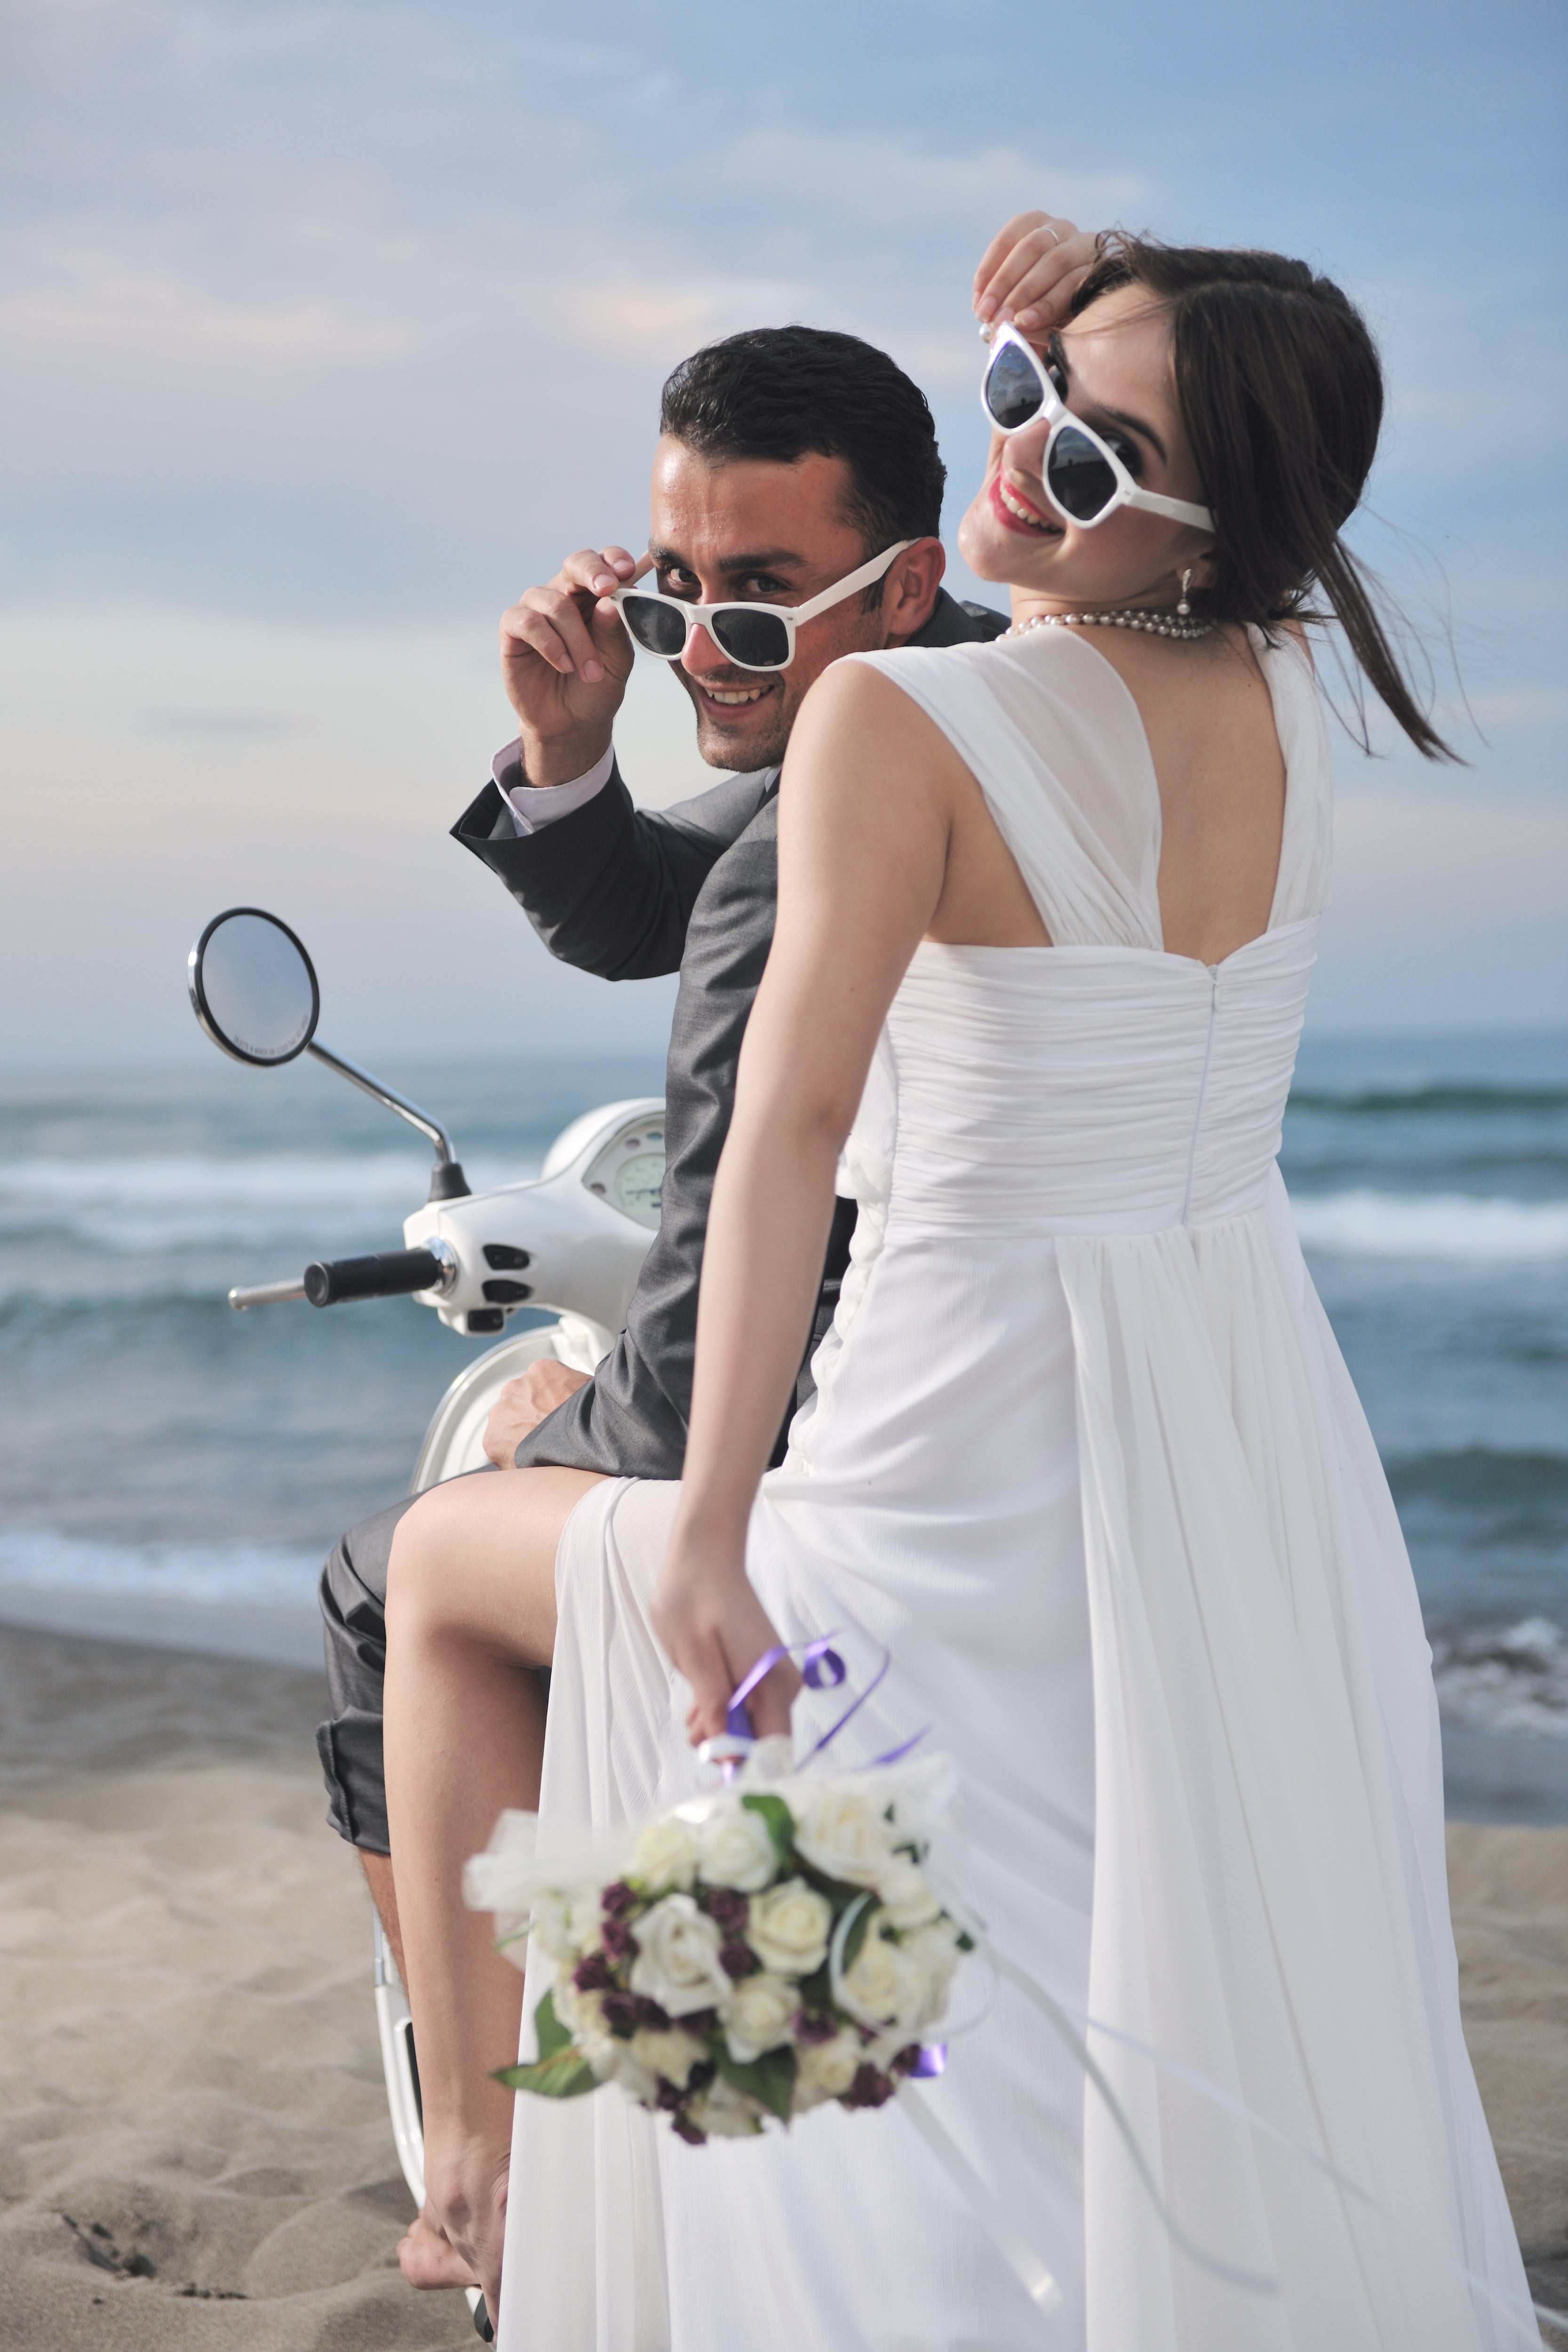 Just married couple wearing sunglasses on the beach having fun riding a scooter